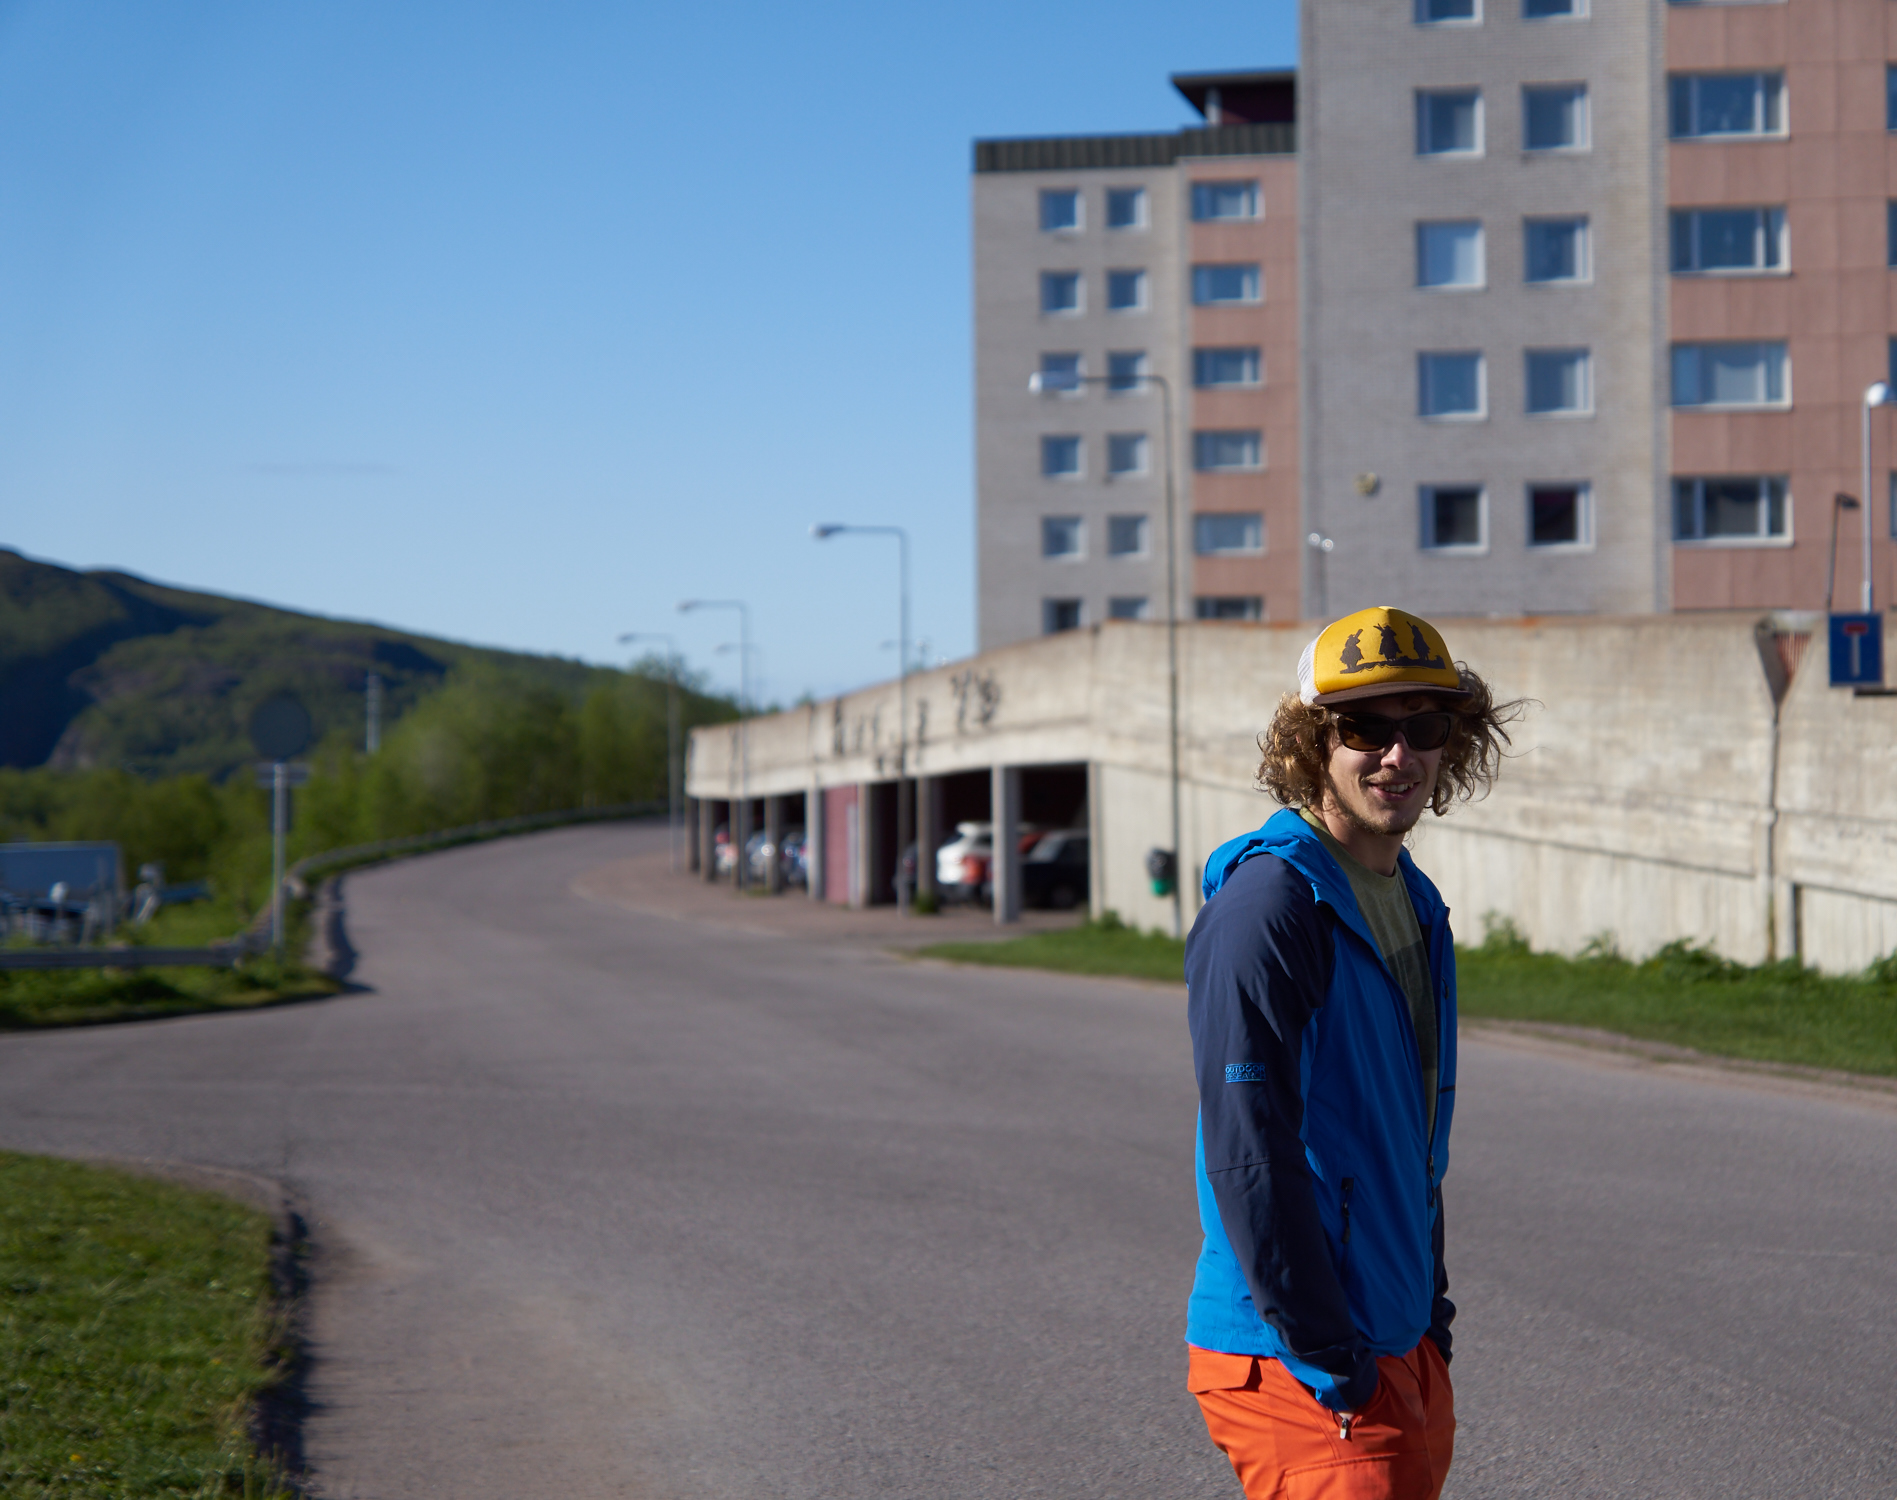 Strolling down memory lane on Gruvvägen, where I used to live way back when. Photo by Andrea